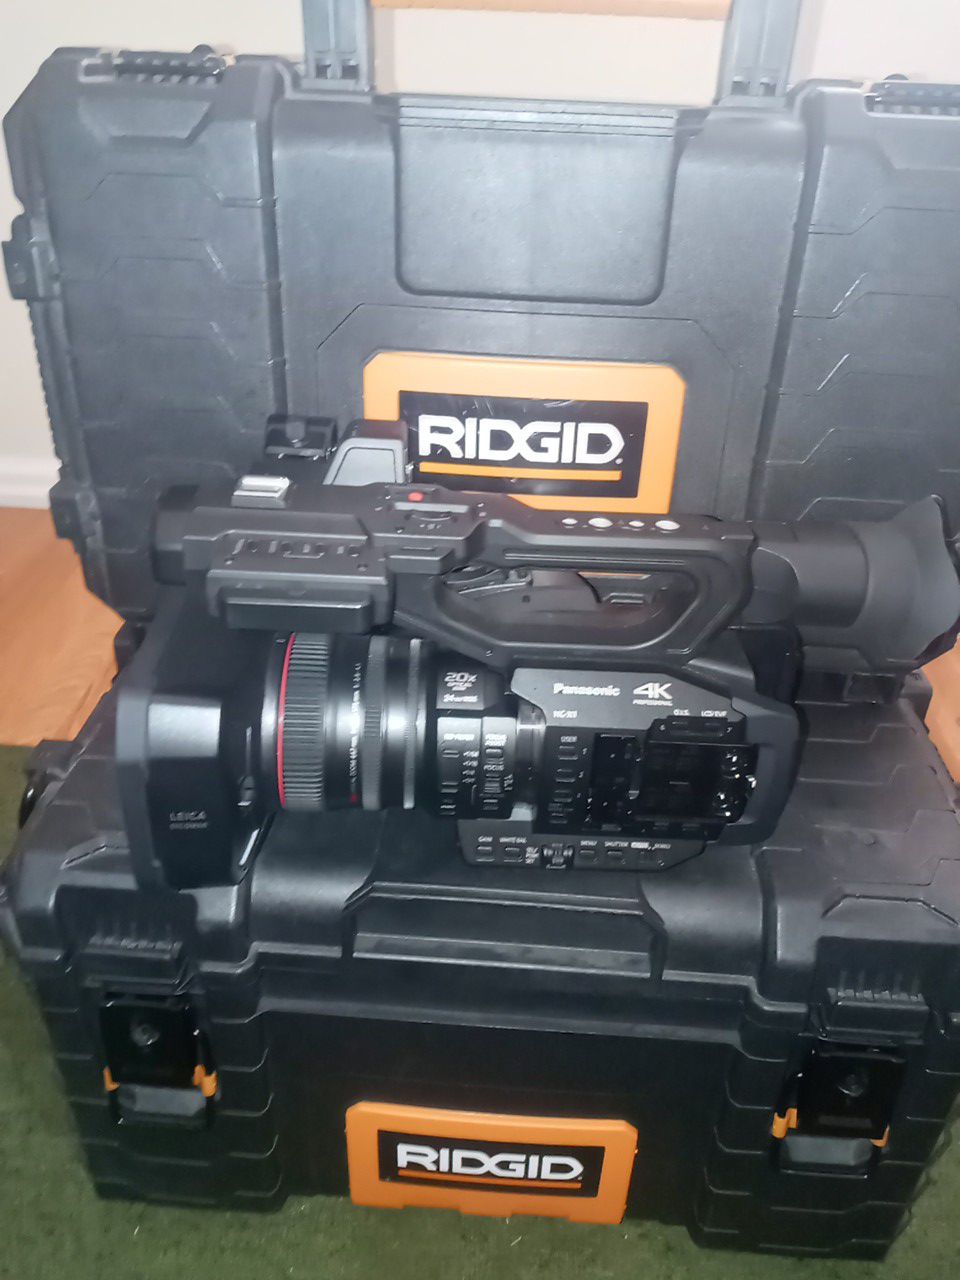 Panasonic 4k camera with carry boxes and accessory's